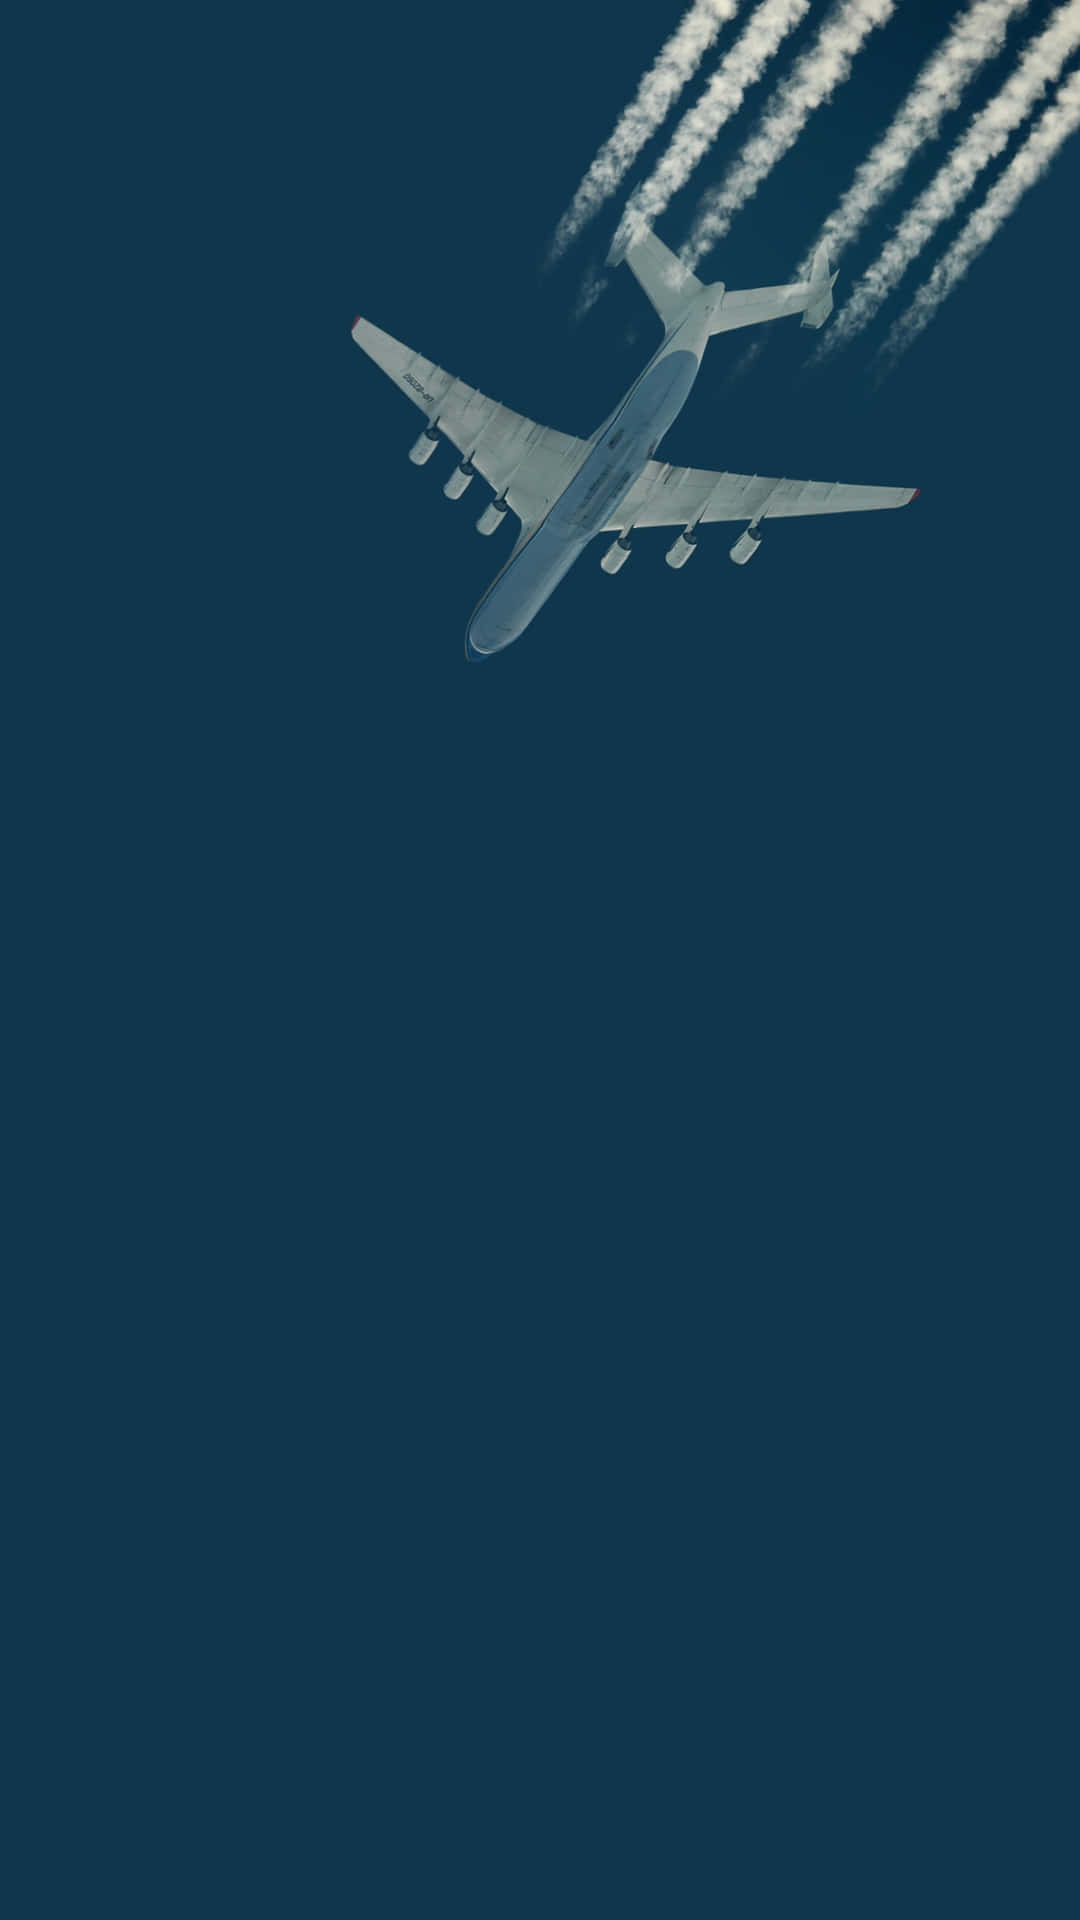 Airplane Leaves Six Trails Of Smoke Android Plane Background